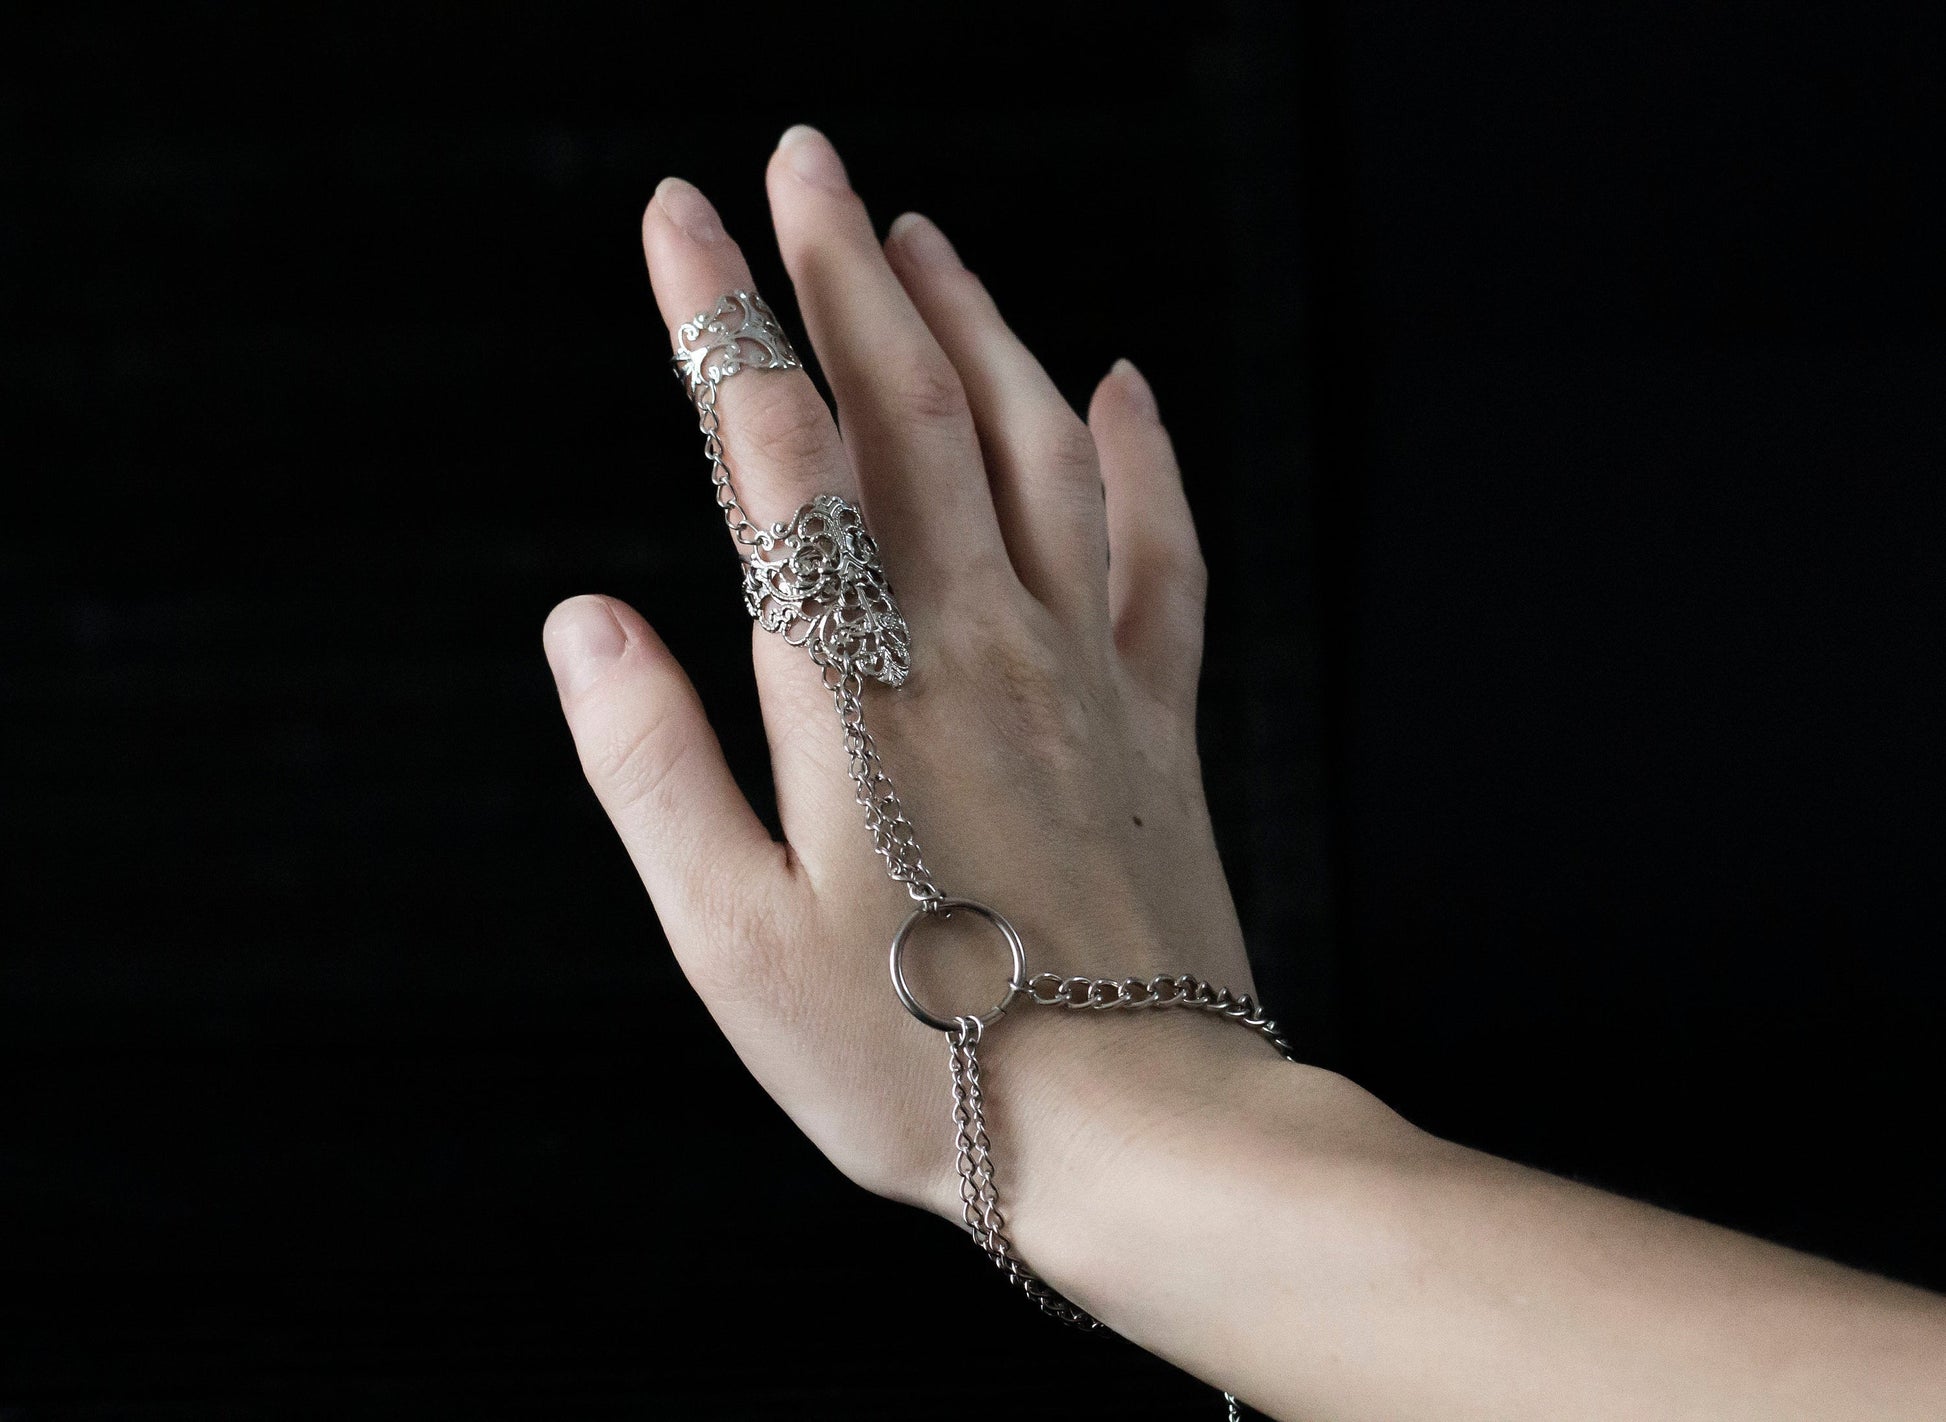 Experience the edgy allure of Myril Jewels with this handcrafted punk hand chain bracelet ring, a perfect complement to gothic and alternative styles. This piece features a lustrous, interwoven chain that drapes elegantly from a central ring to a detailed filigree band, wrapping around the middle finger for a secure fit. Its intricate design captures the essence of dark-avantgarde aesthetics, making it a must-have for those who resonate with neo-gothic charm and whimsigoth elegance.